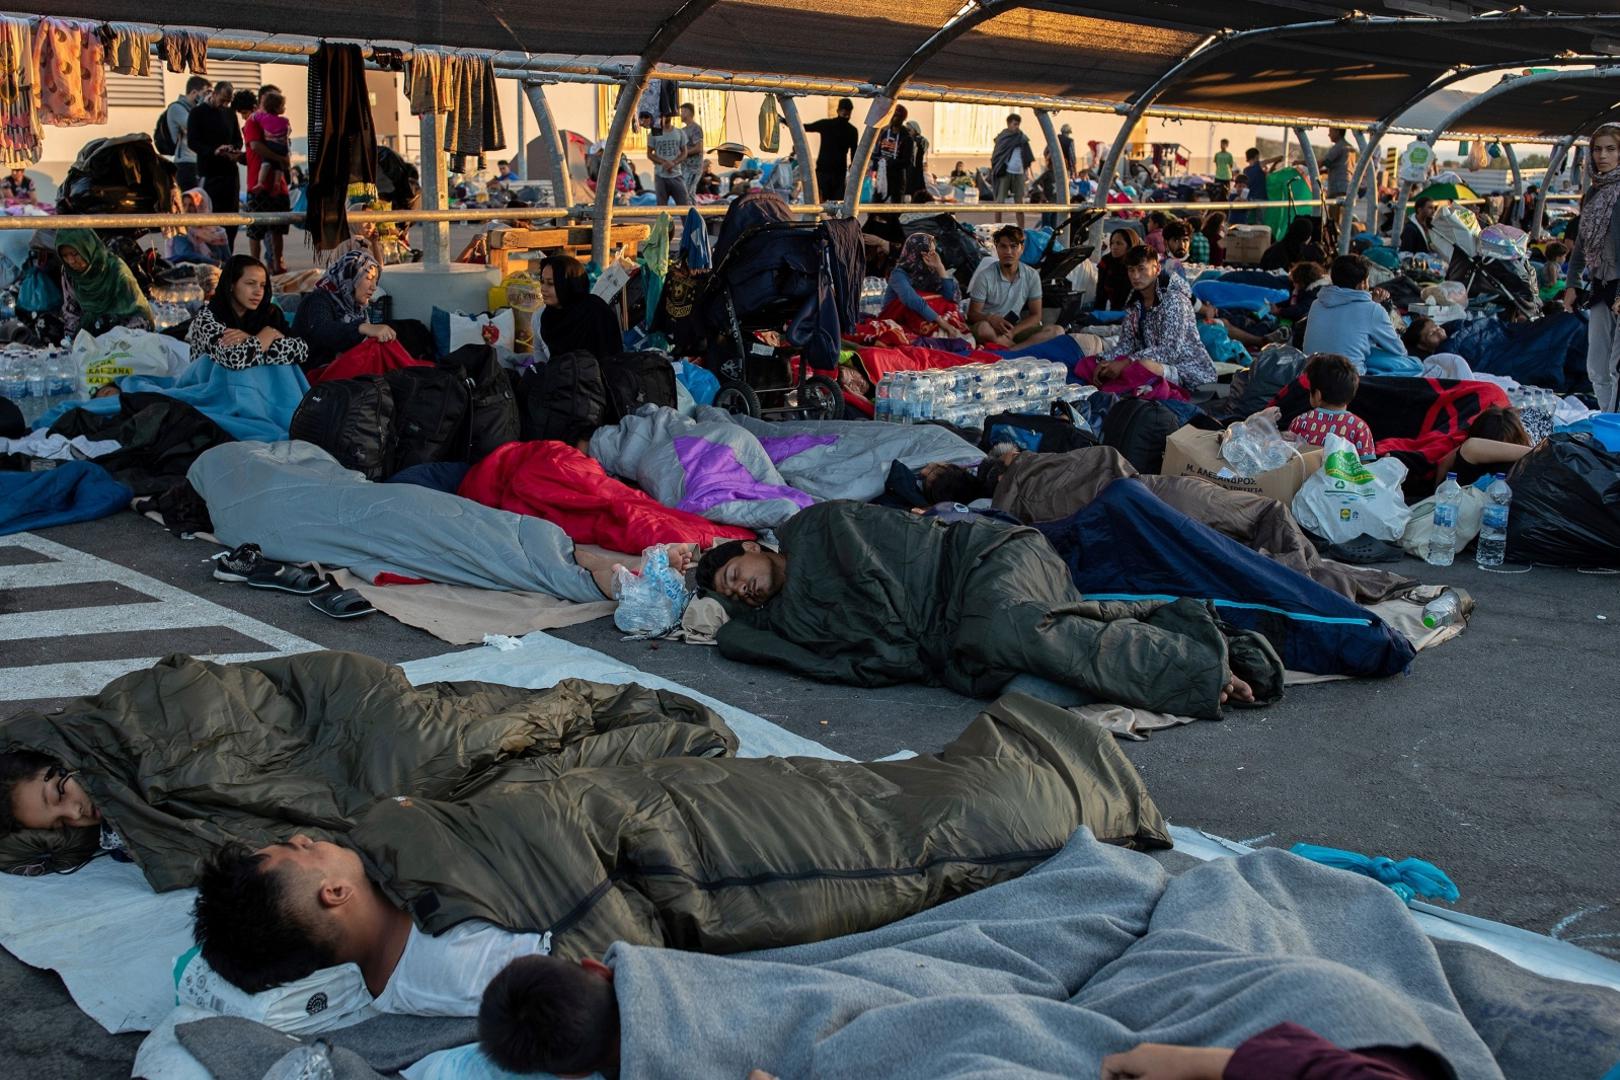 Refugees and migrants sleep at the parking of a supermarket, following a fire at the Moria camp on the island of Lesbos Refugees and migrants sleep at the parking of a supermarket, following a fire at the Moria camp on the island of Lesbos, Greece, September 11, 2020. REUTERS/Alkis Konstantinidis ALKIS KONSTANTINIDIS